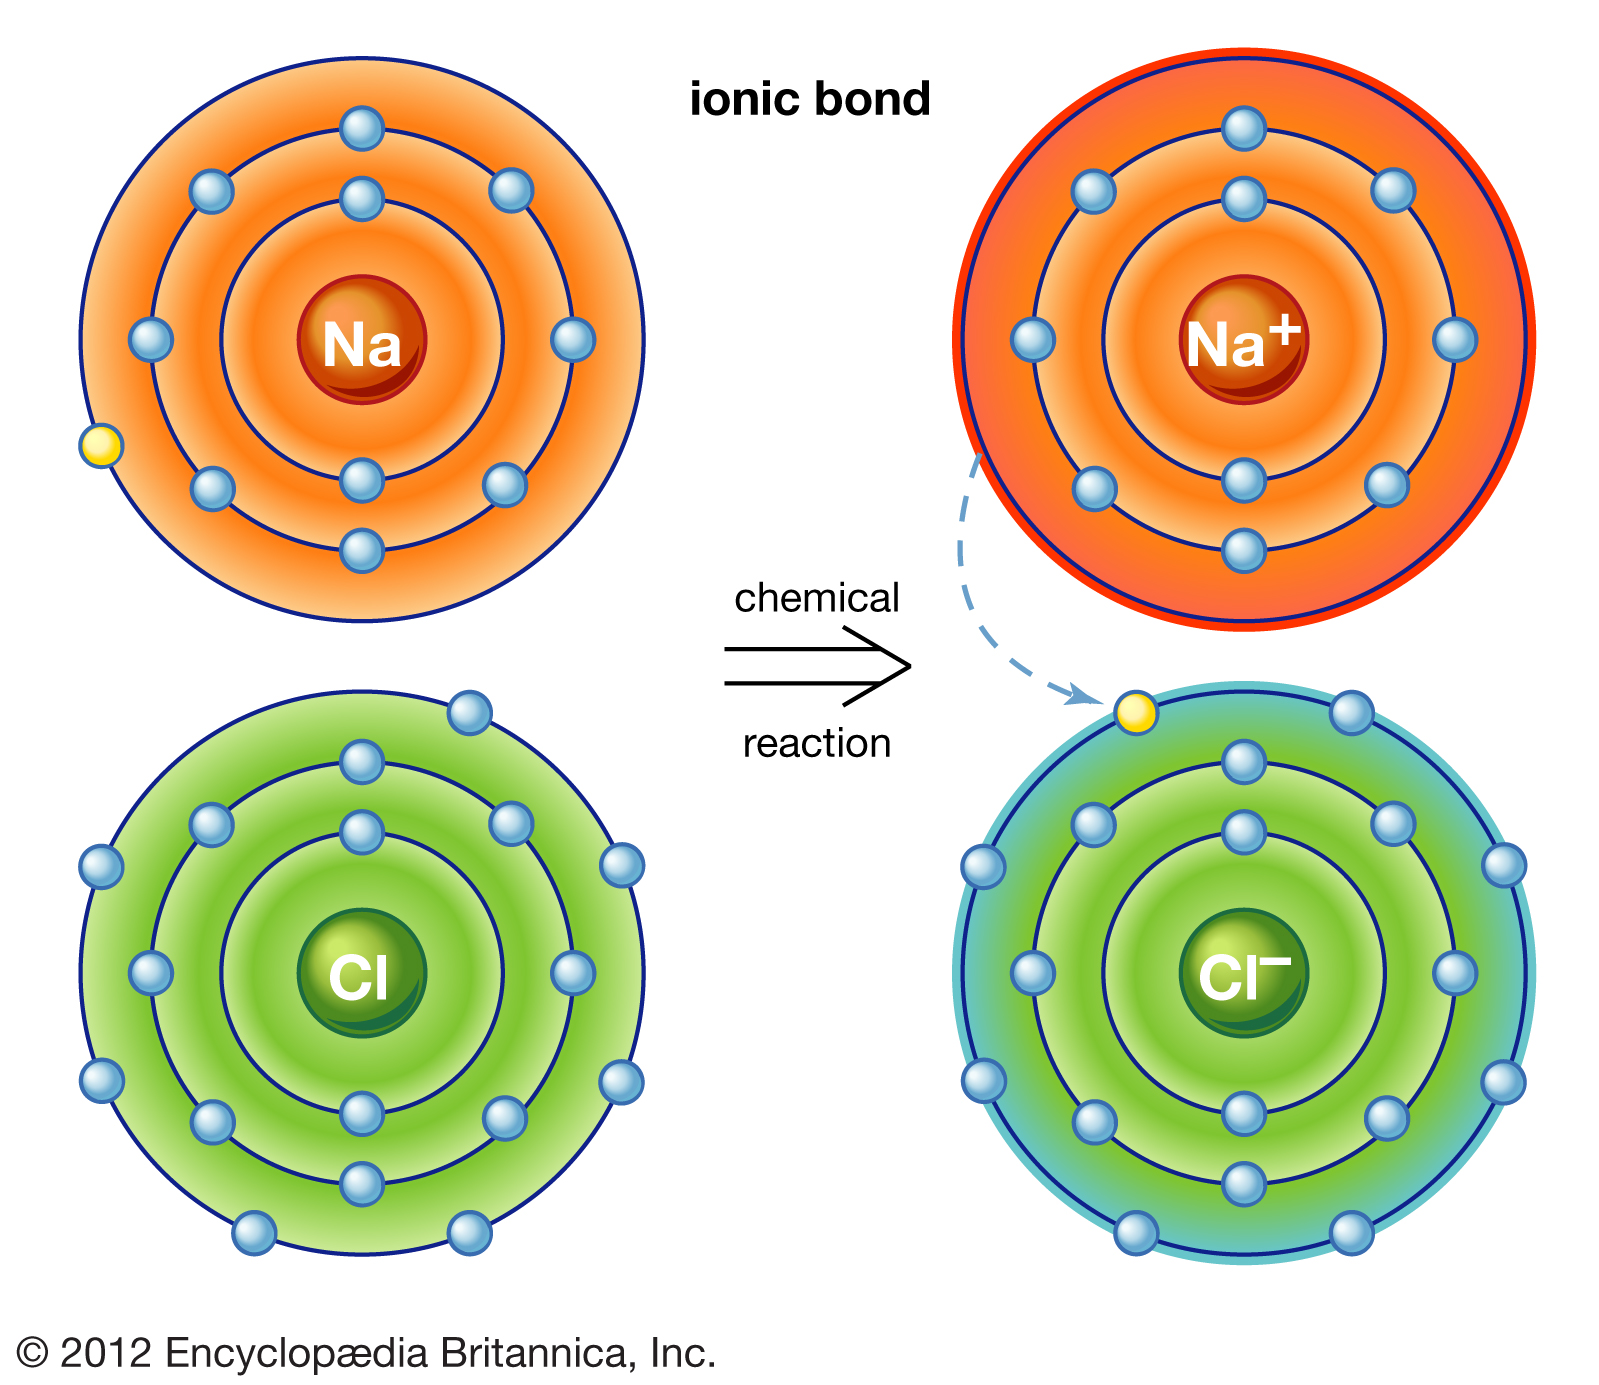 Chemistry Knowledge Comparison Between Covalent And Ionic Bond